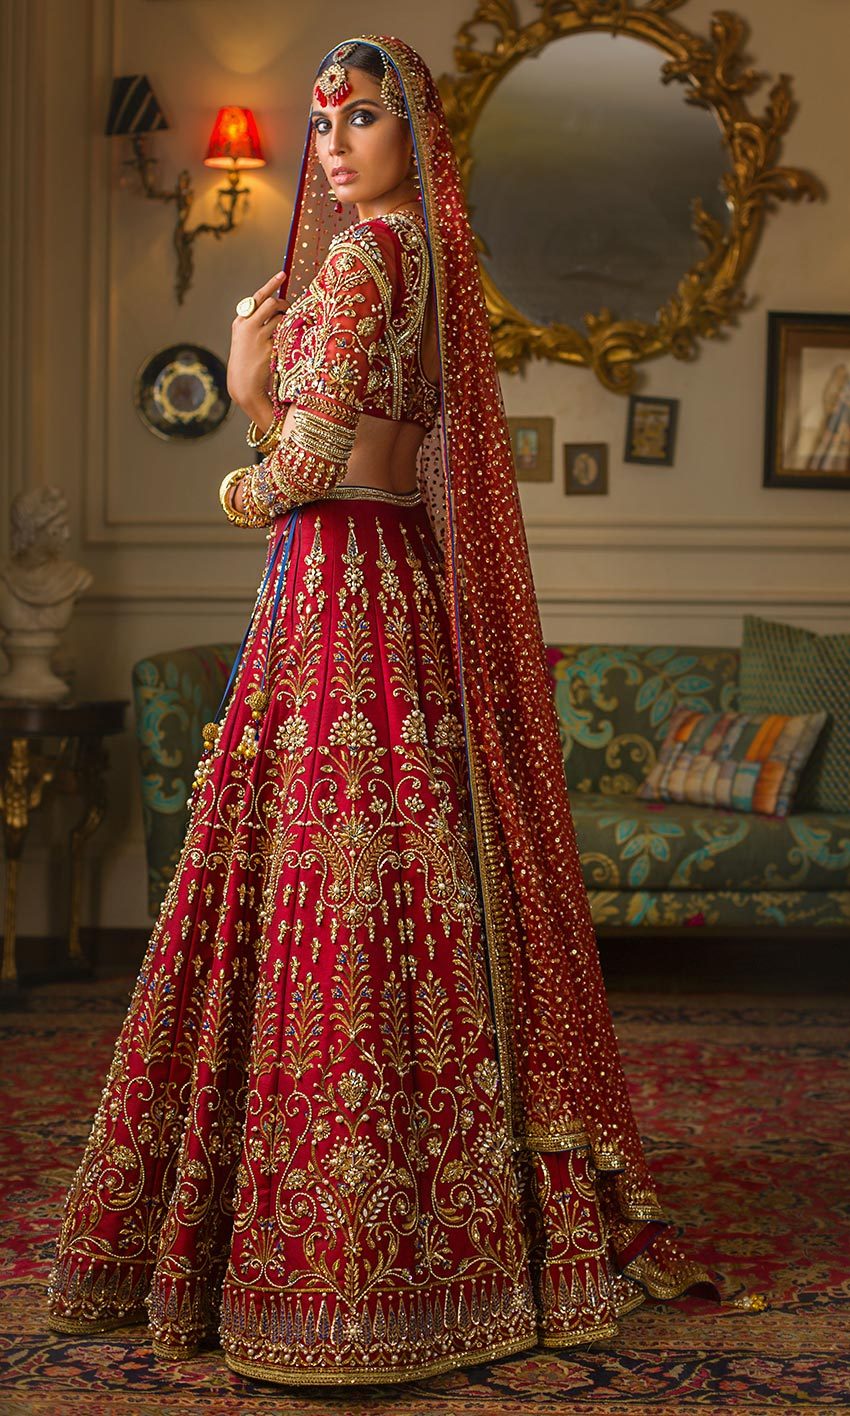 Tips On What Jewellery To Pair With Heavy Bridal Lehengas